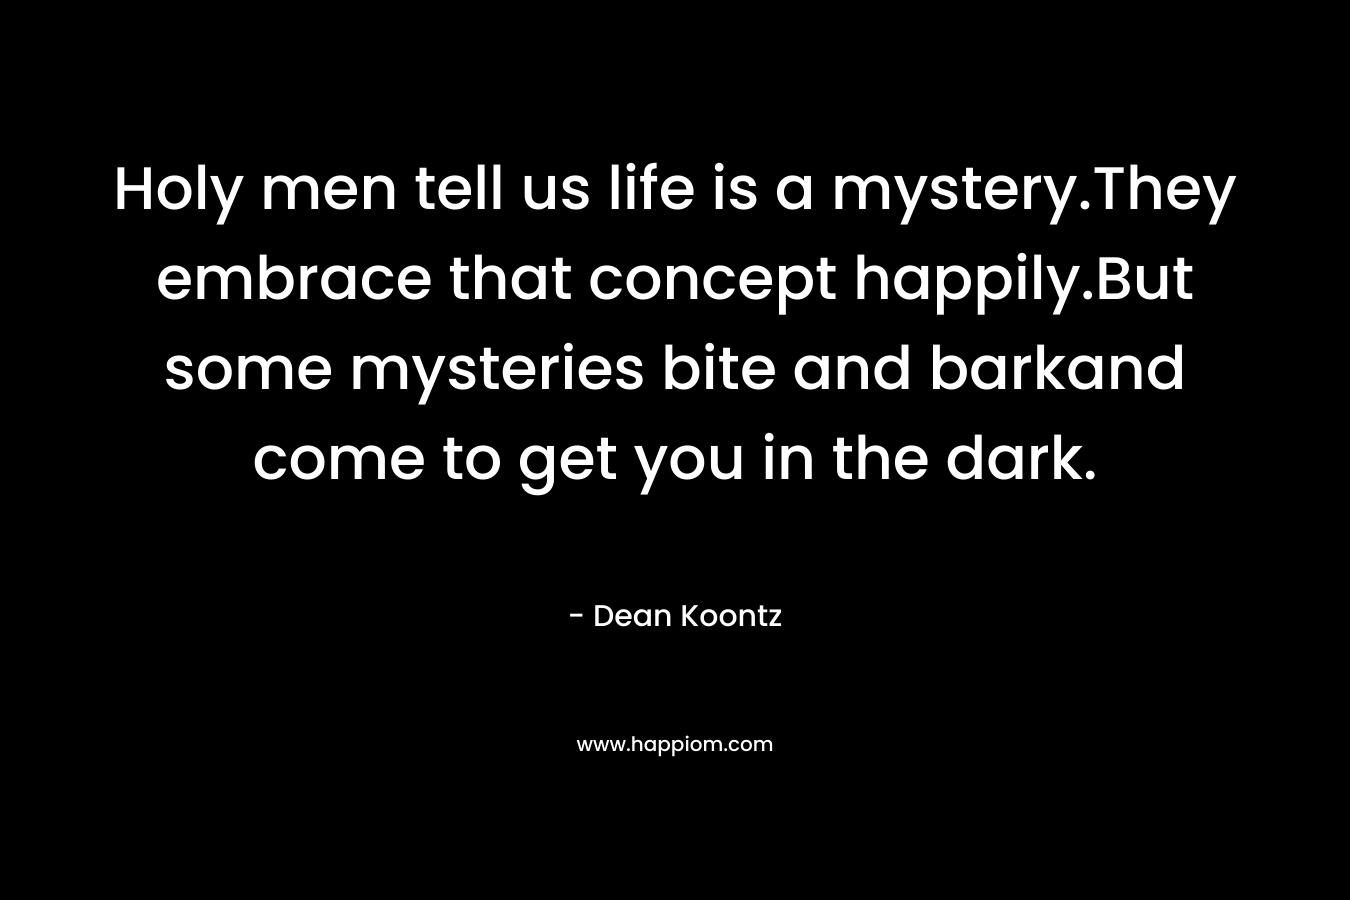 Holy men tell us life is a mystery.They embrace that concept happily.But some mysteries bite and barkand come to get you in the dark. – Dean Koontz